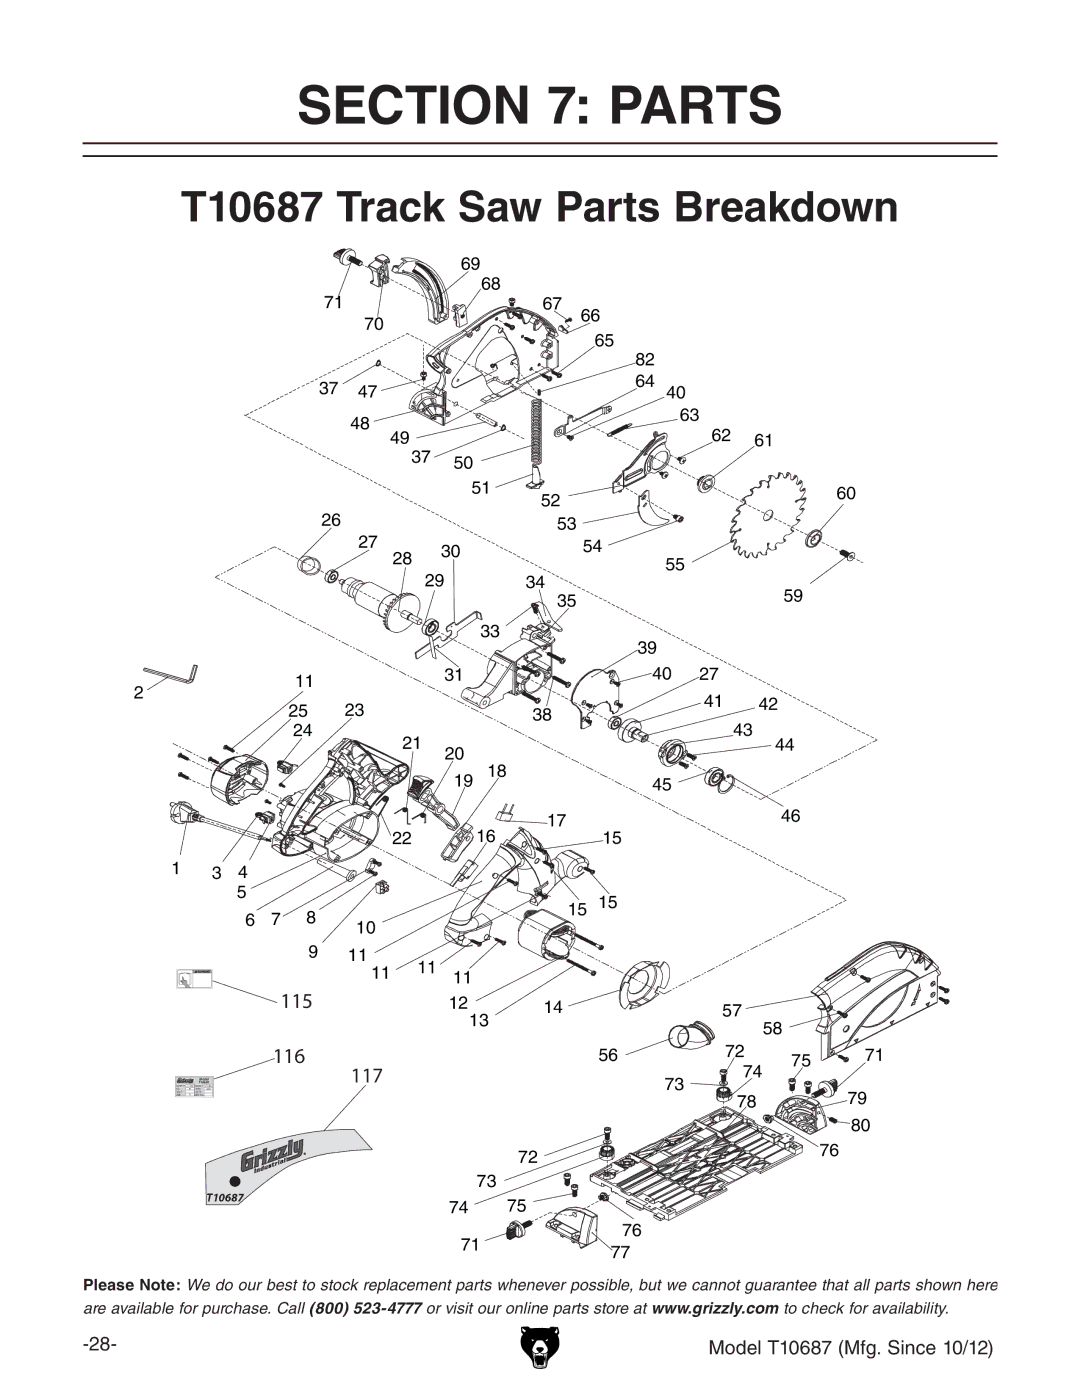 Grizzly owner manual T10687 Track Saw Parts Breakdown 